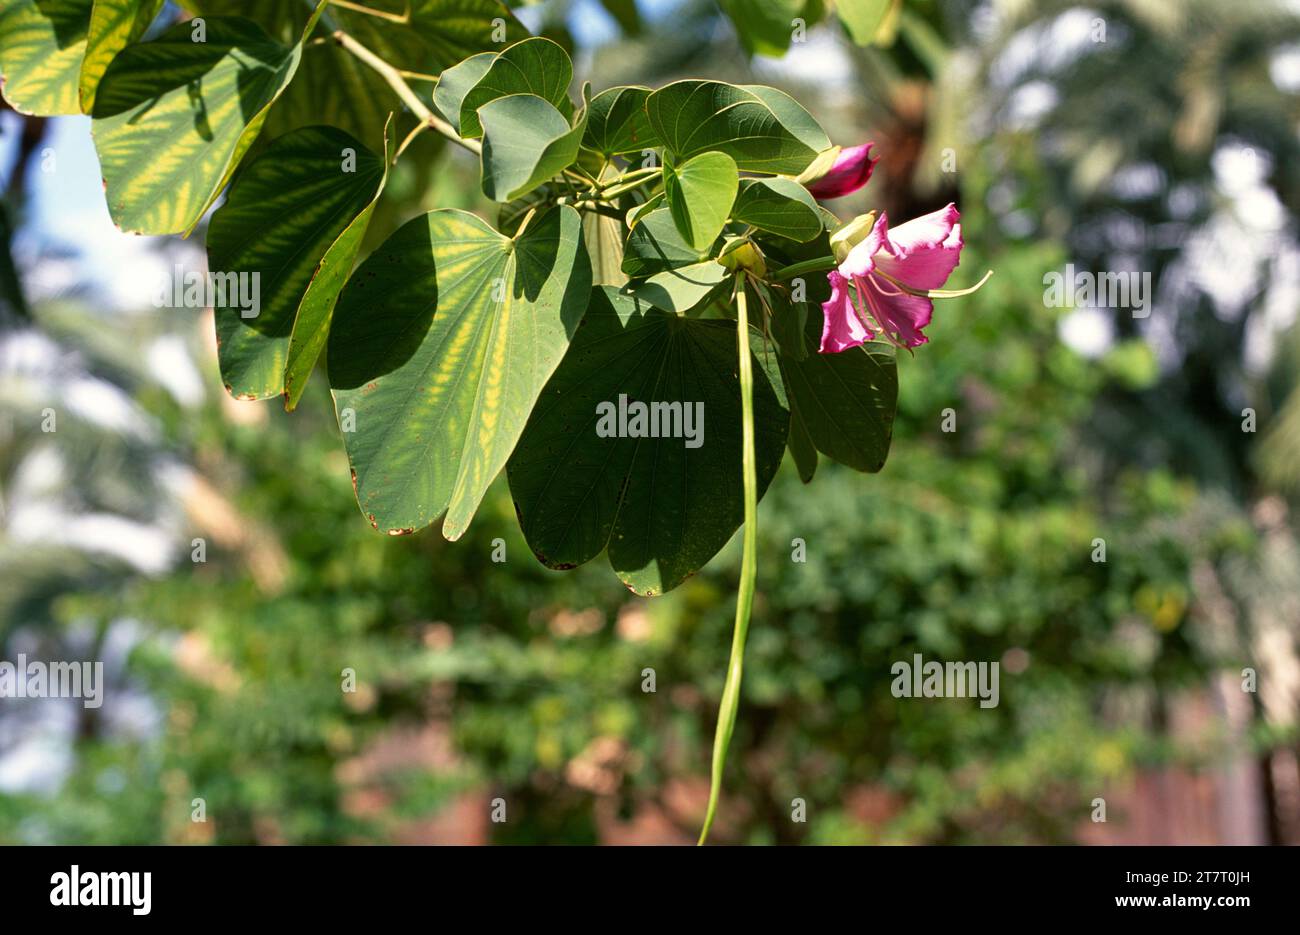 Orchid tree or mountain ebony (Bahuinia variegata) is a deciduous tree native to southern Asia. Flower, fruit and leaves detail. Stock Photo